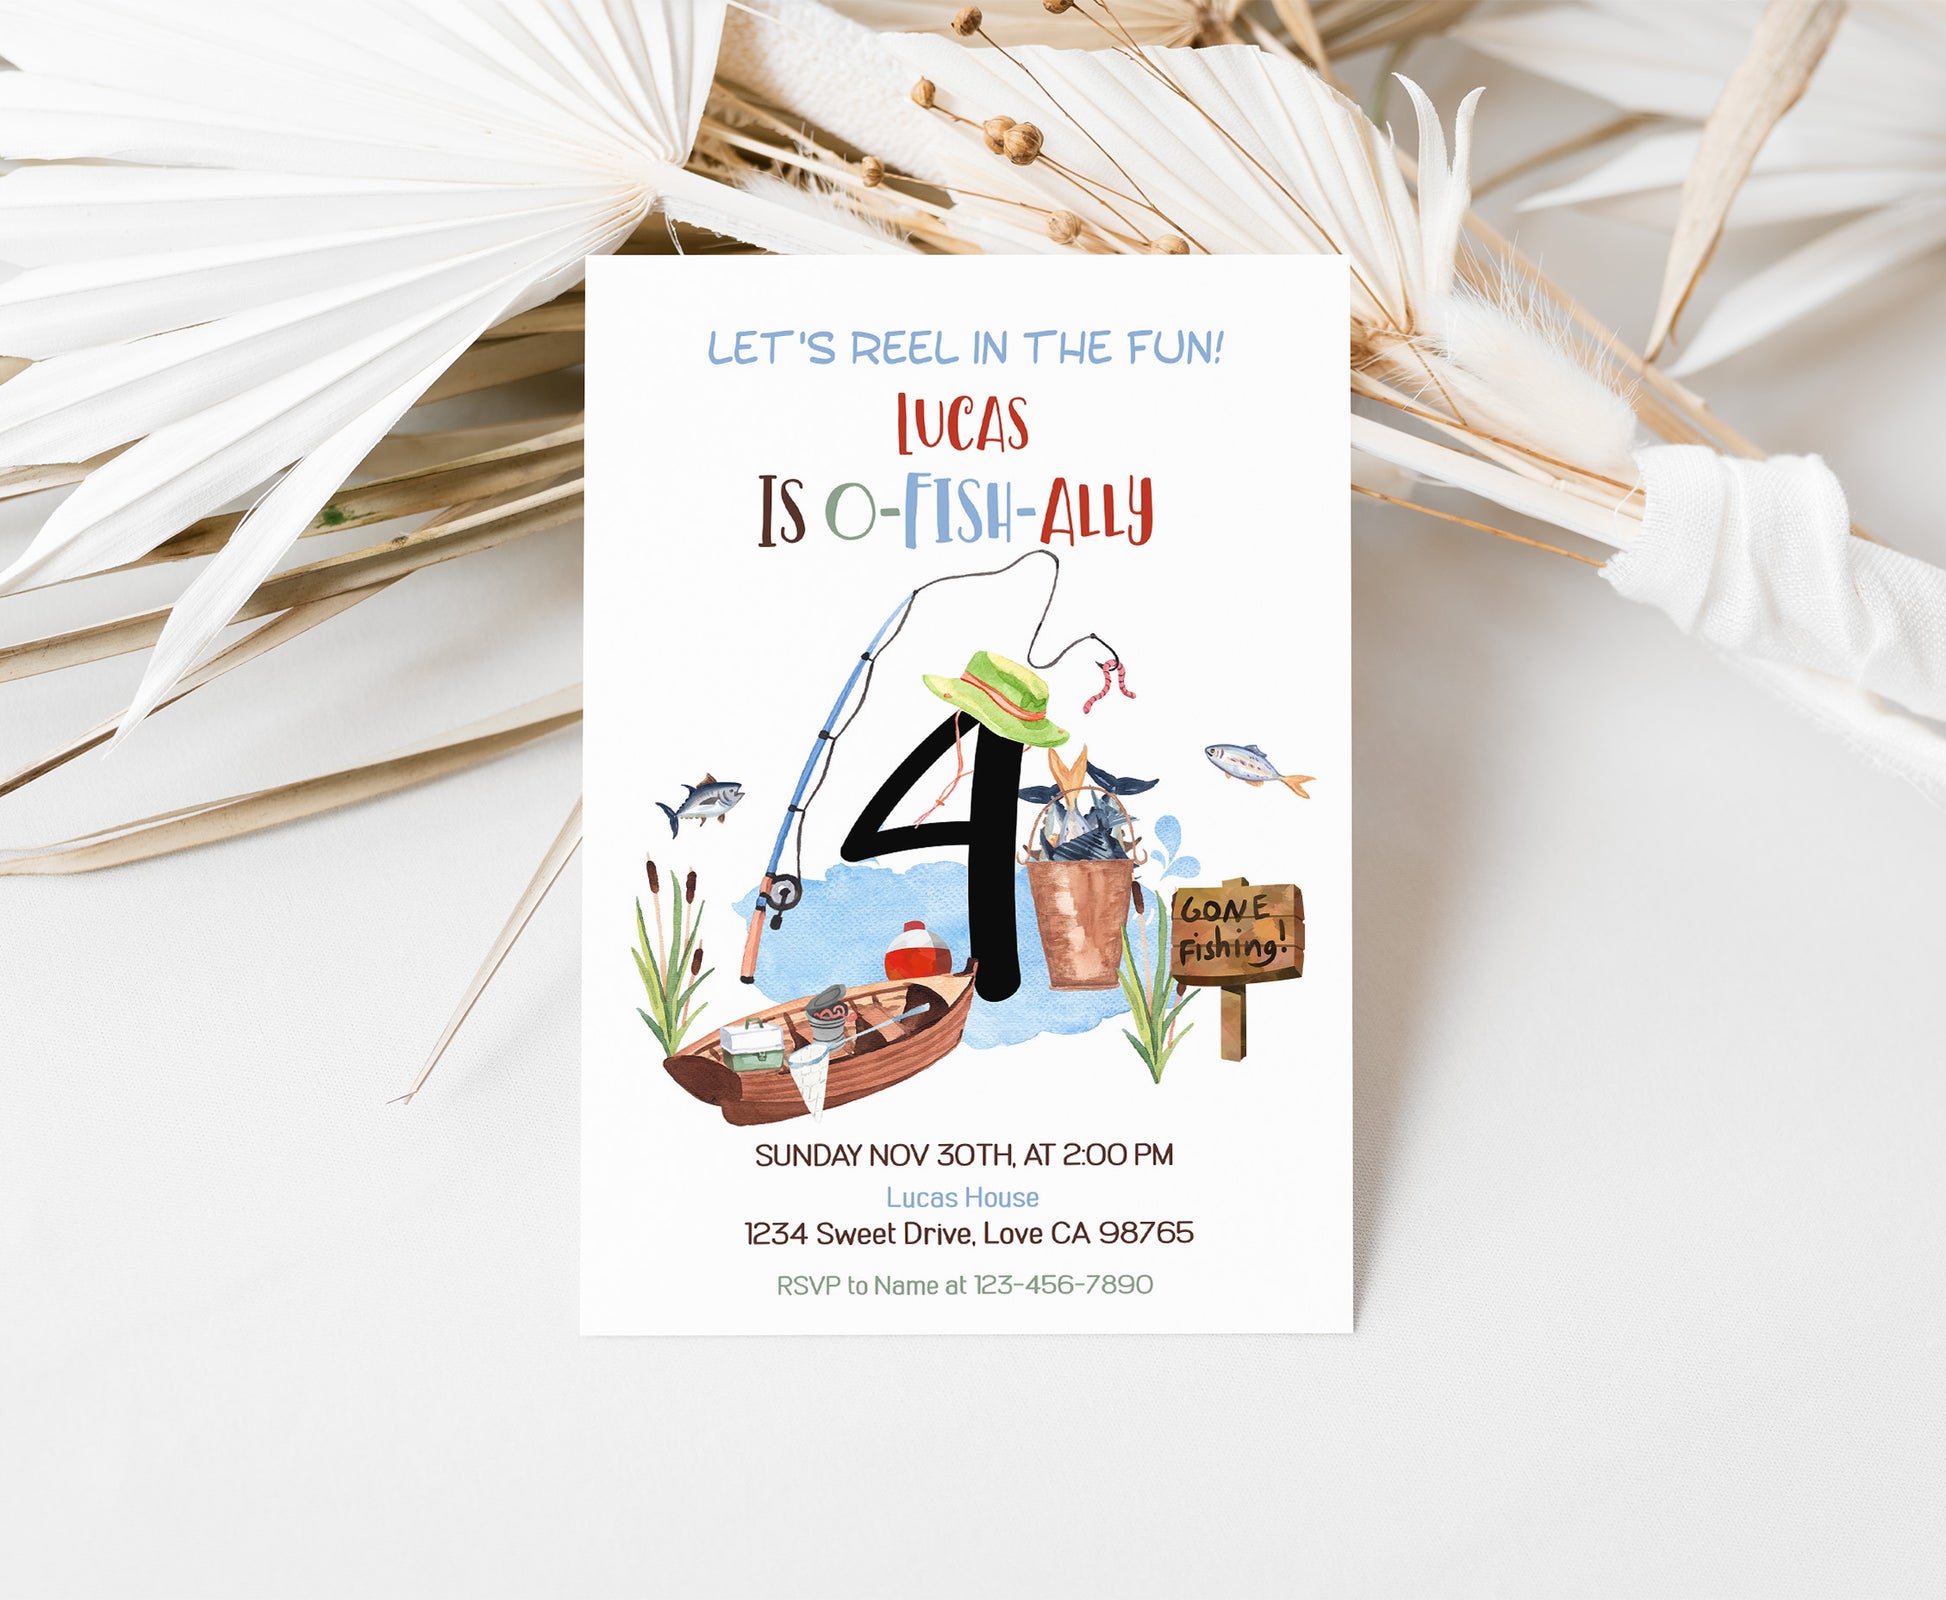 O-Fish-Ally five Birthday Invitation  Editable Fishing Theme Party In –  Print My Party